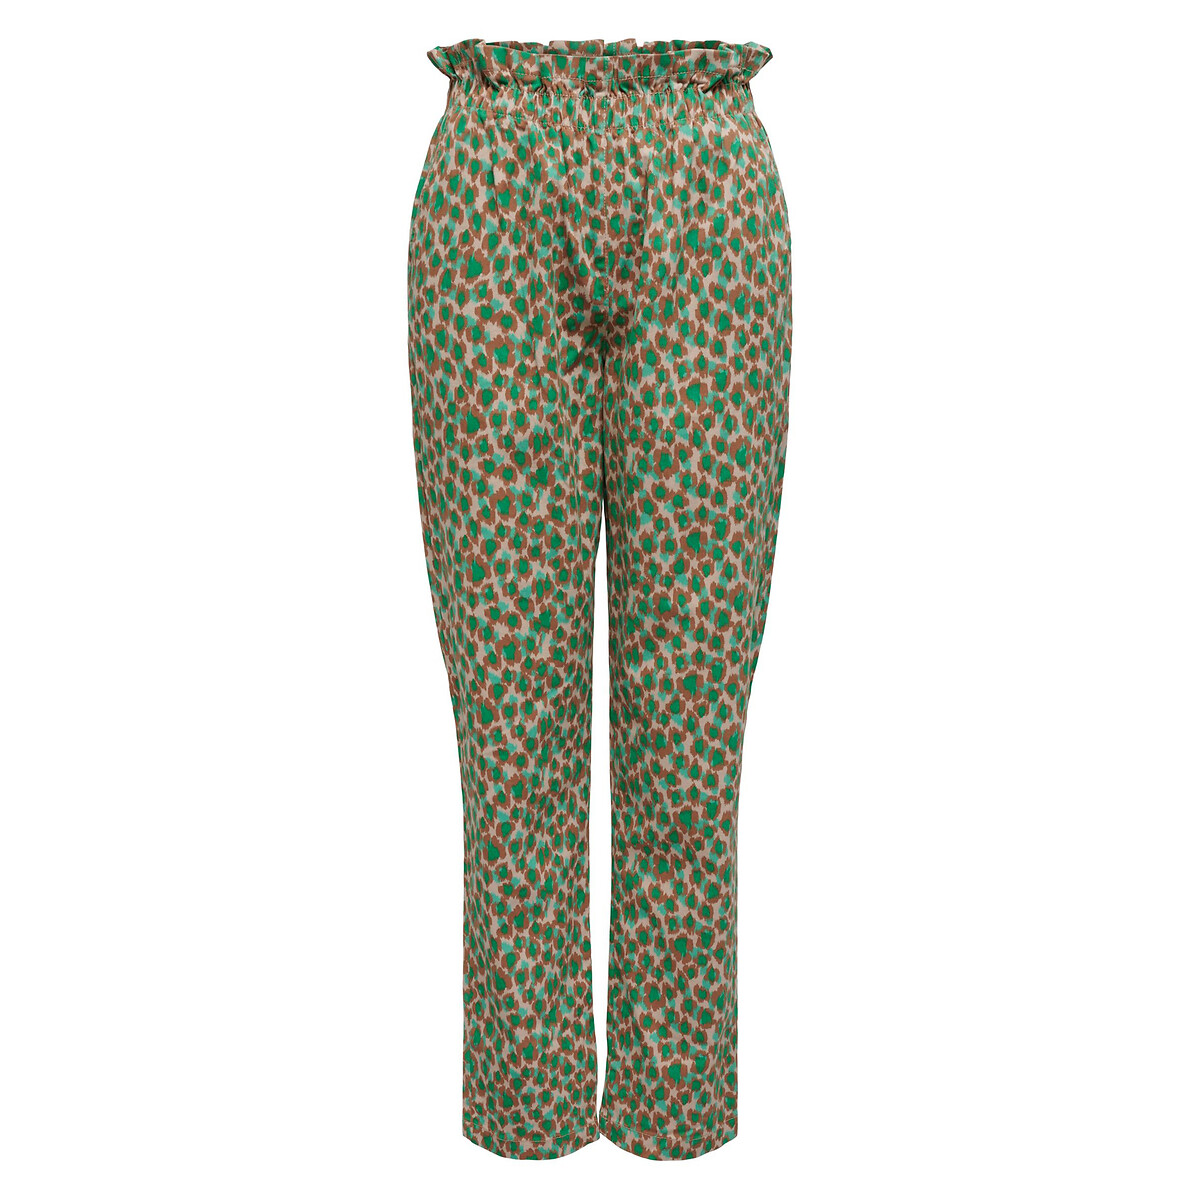 Image of Printed Cotton Cigarette Trousers with High Waist